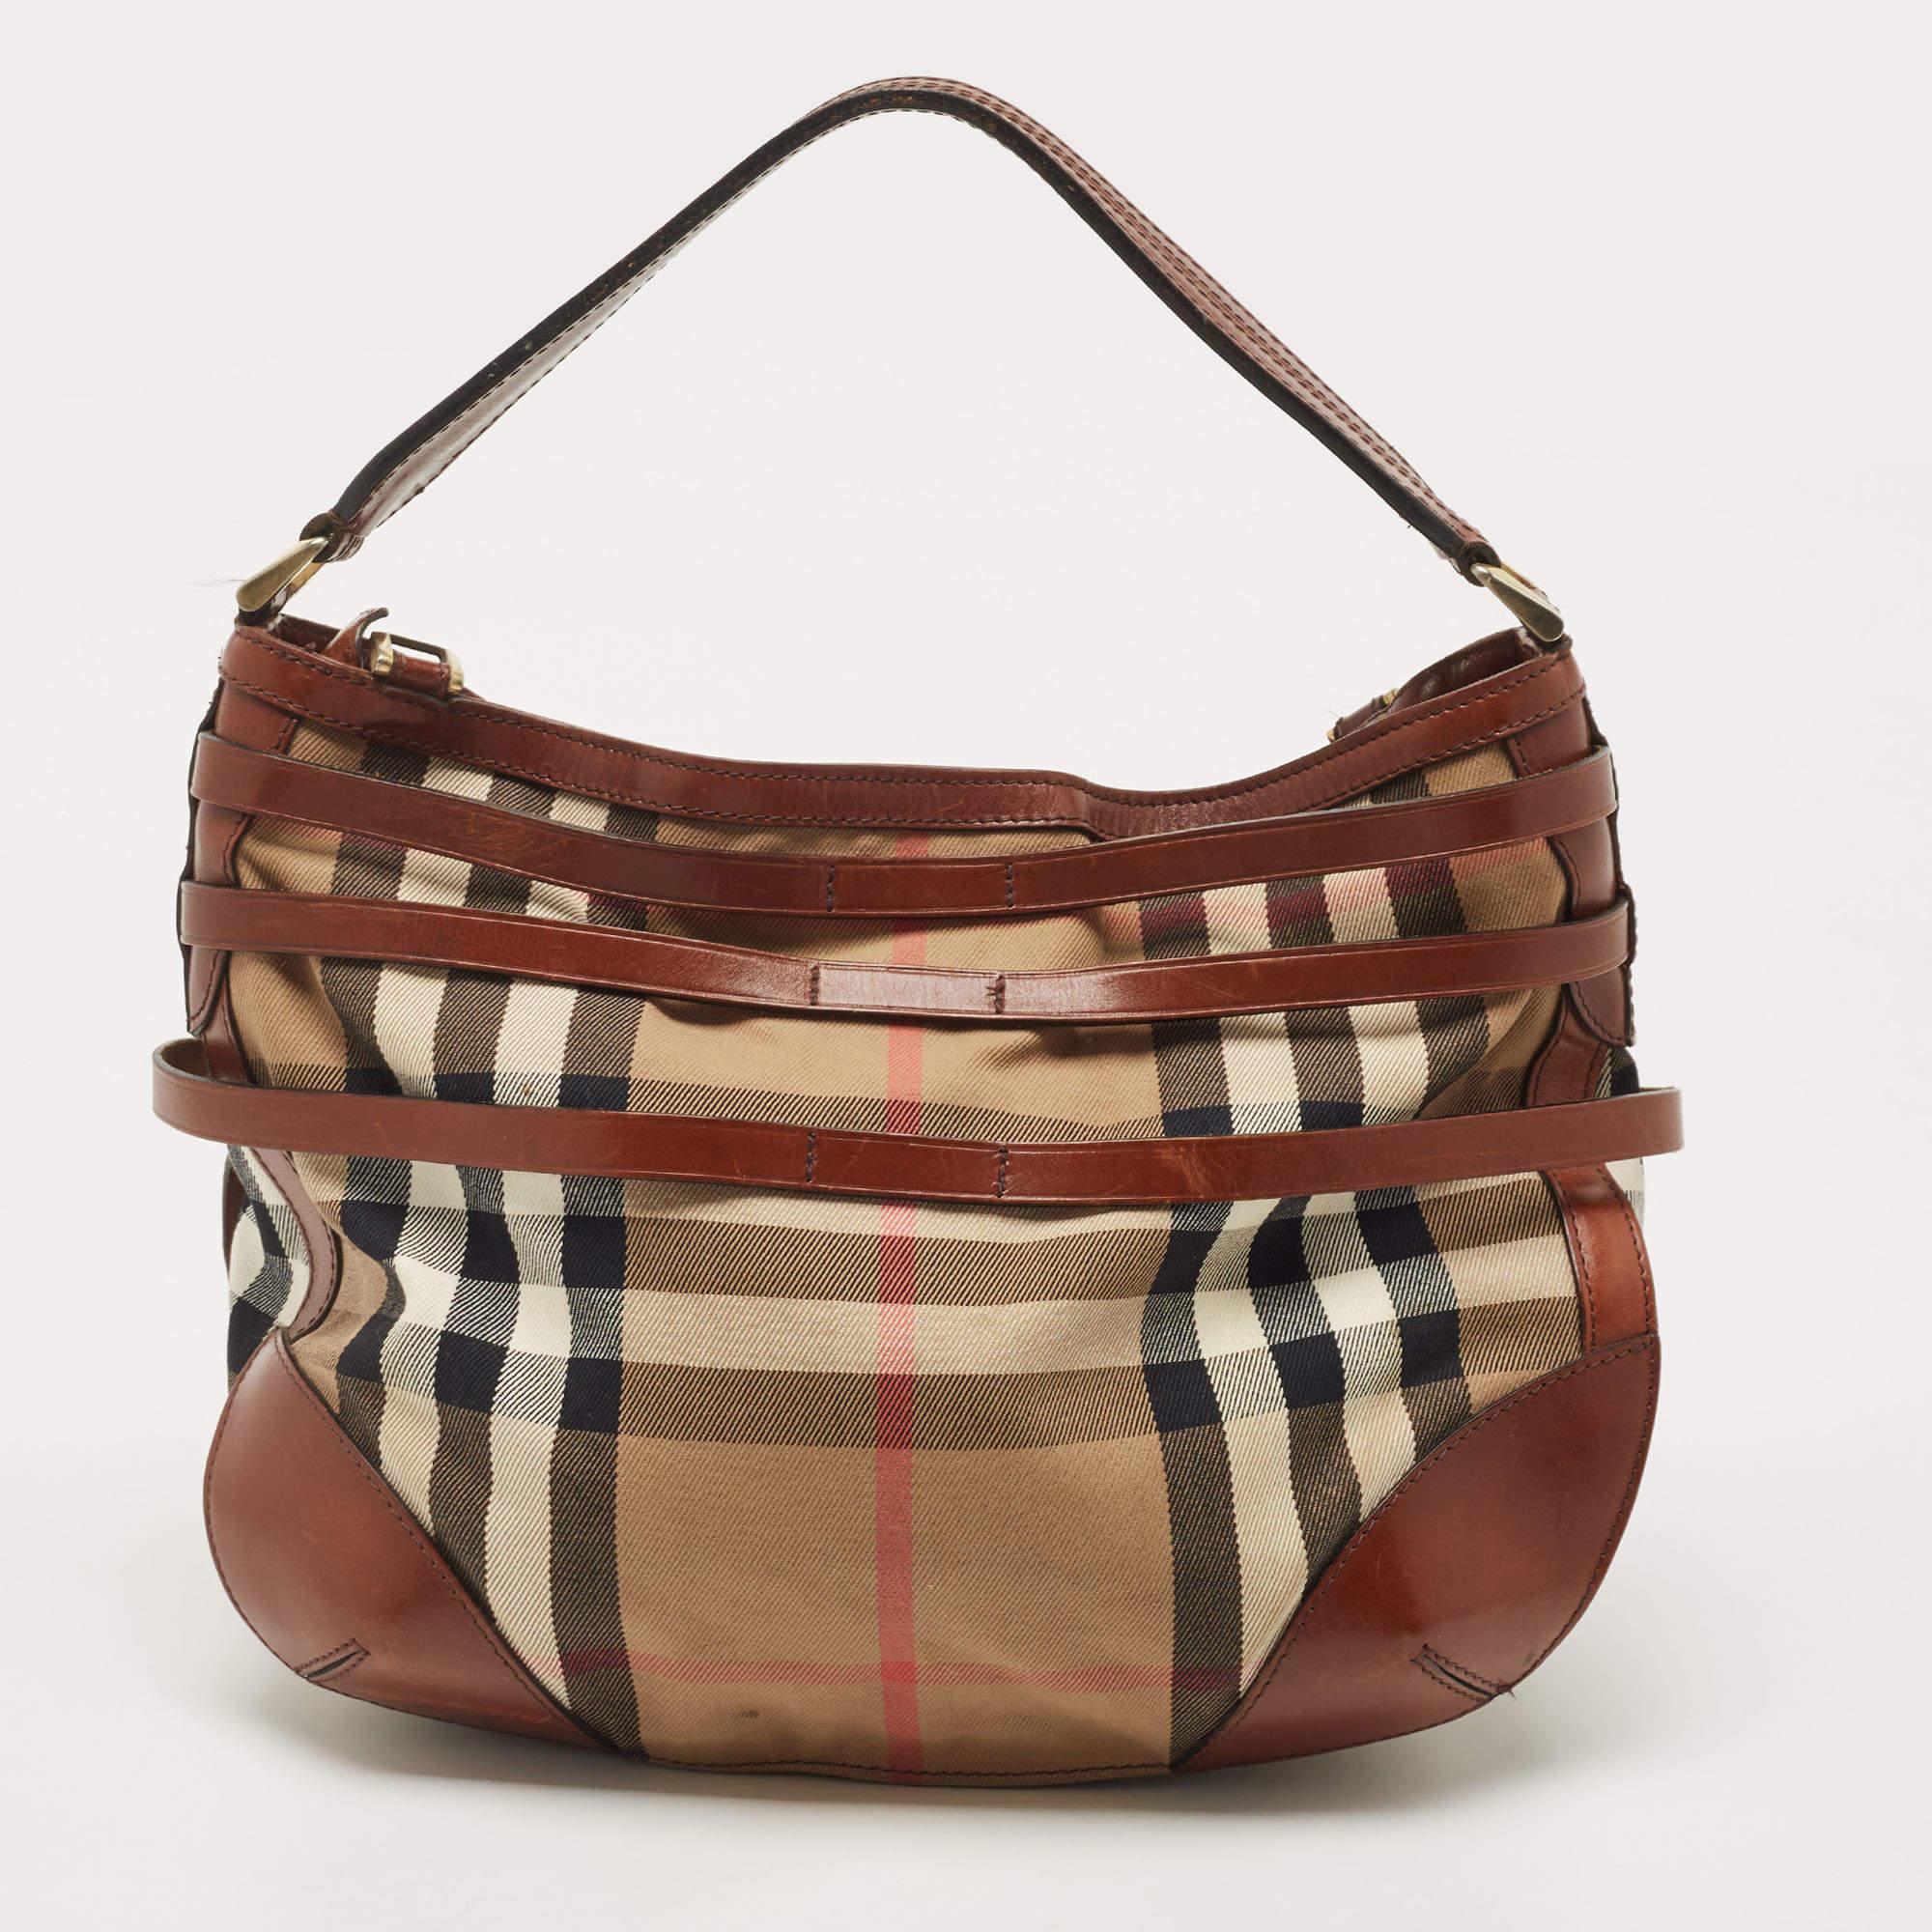 Marked by flawless craftsmanship and enduring appeal, this Burberry hobo is bound to be a versatile and durable accessory. It has a spacious size.

Includes: Original Dustbag

